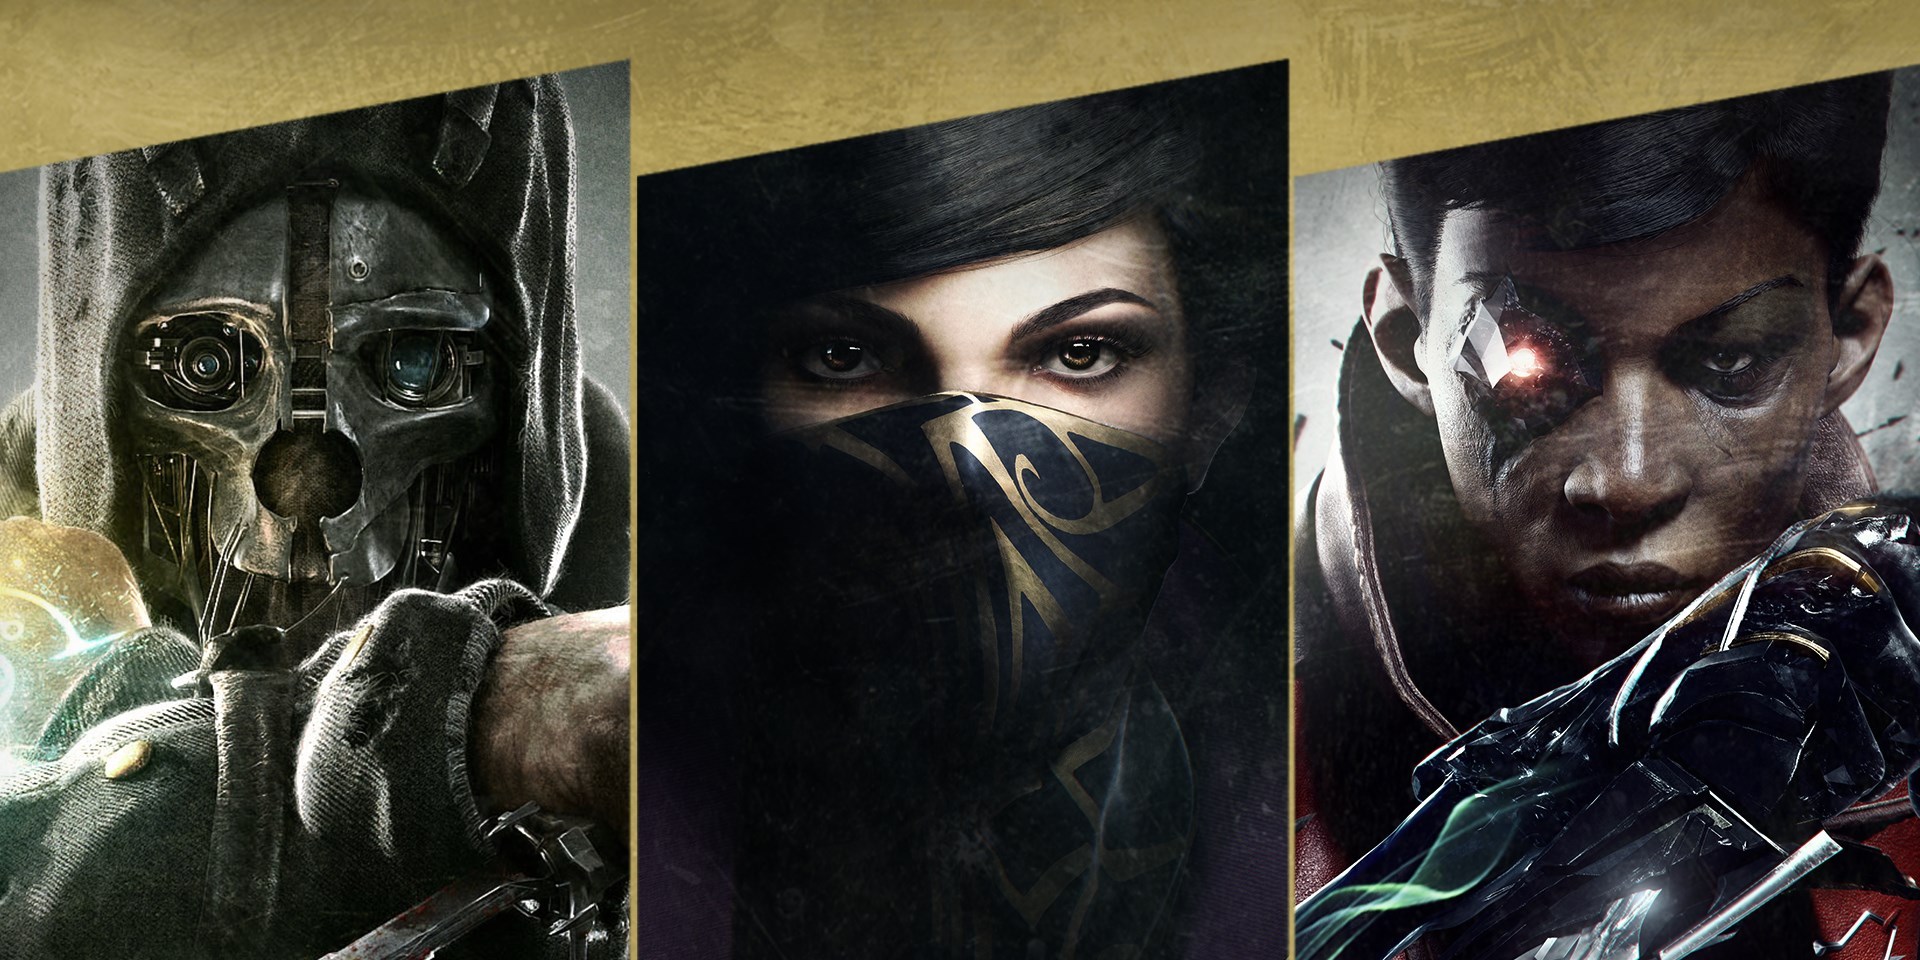 Today’s Best Game Deals: Dishonored Collection $18, Team Sonic Racing $20, more